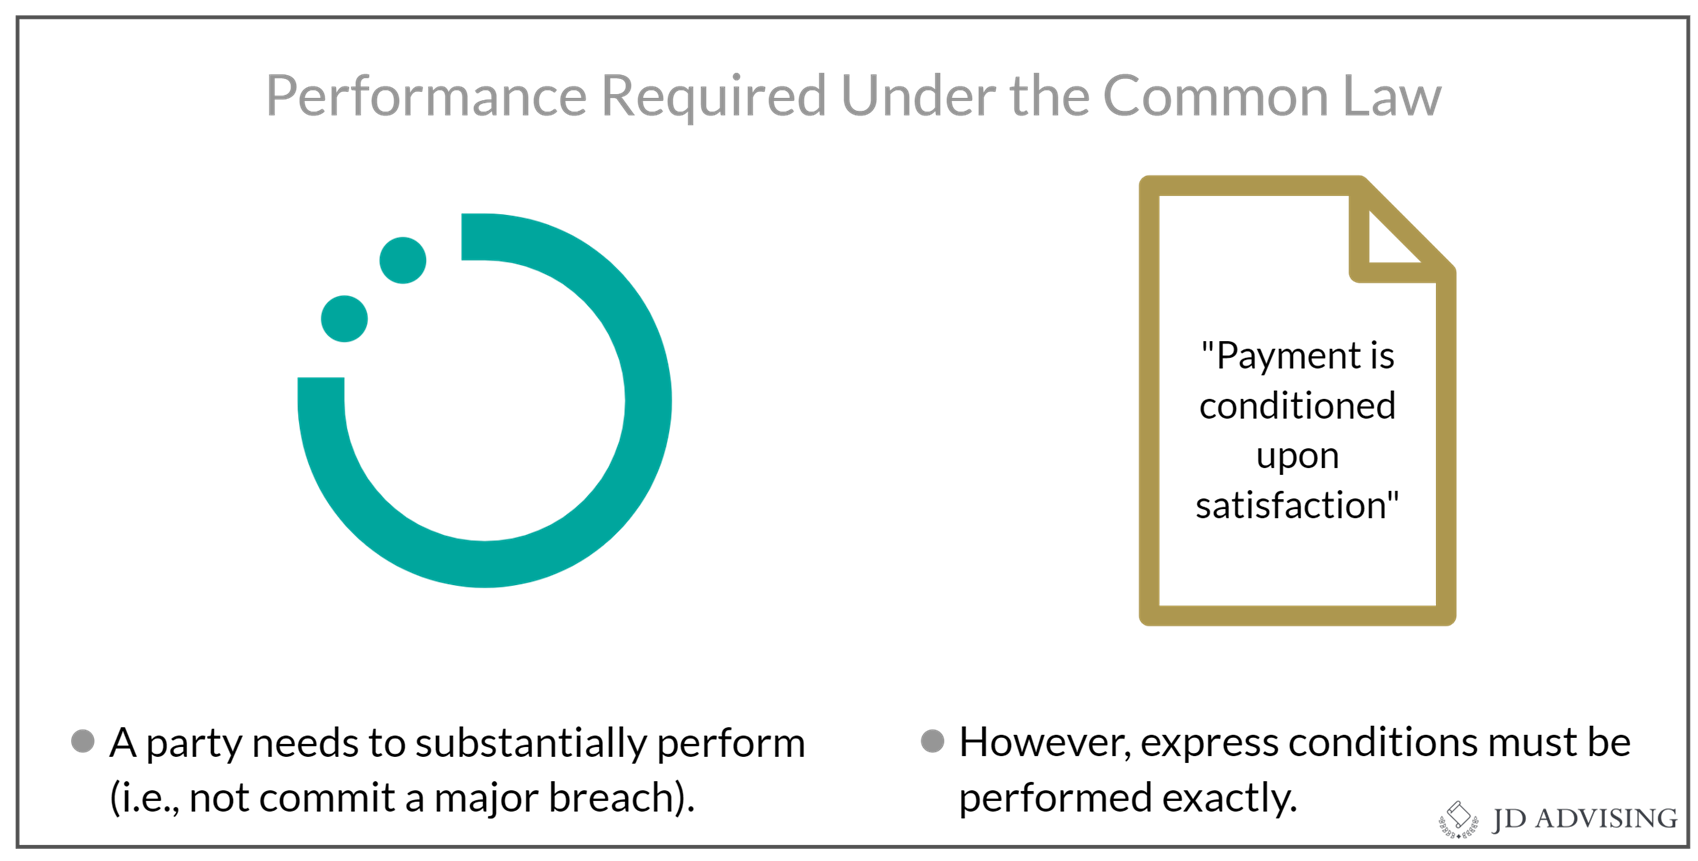 Performance Required Under the Common Law